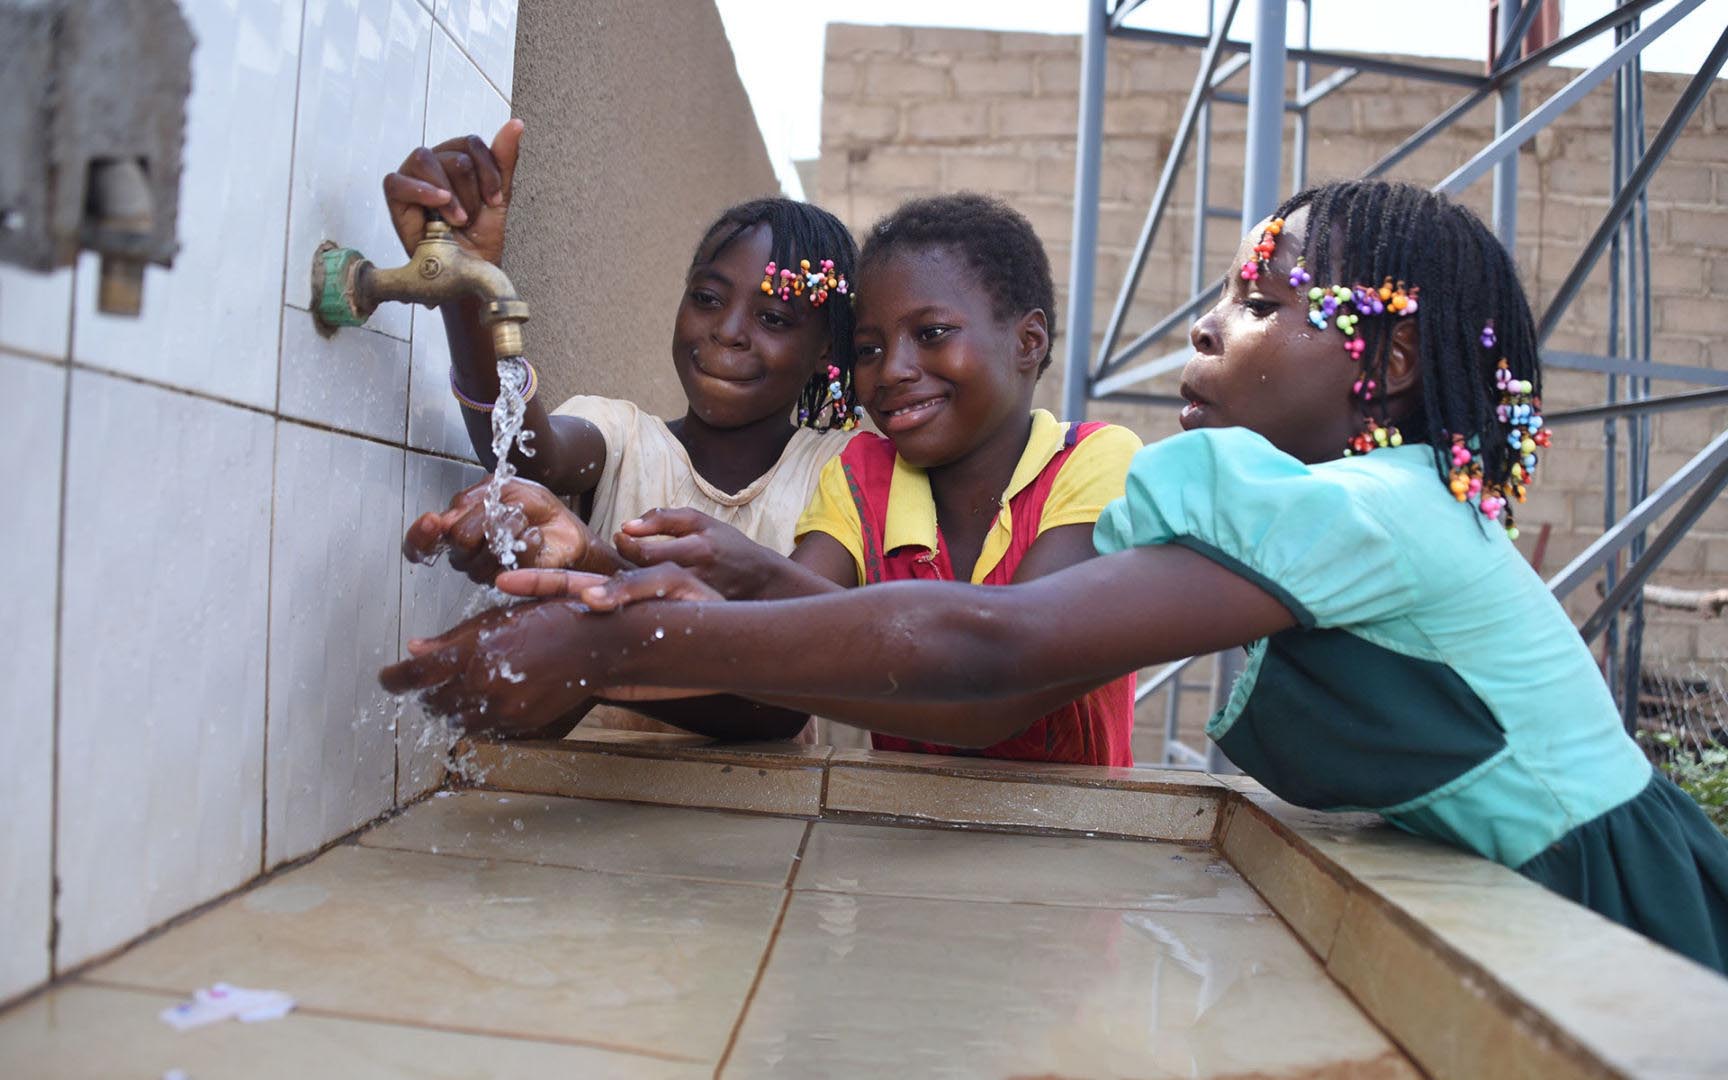 Girls washing their hands with clean water